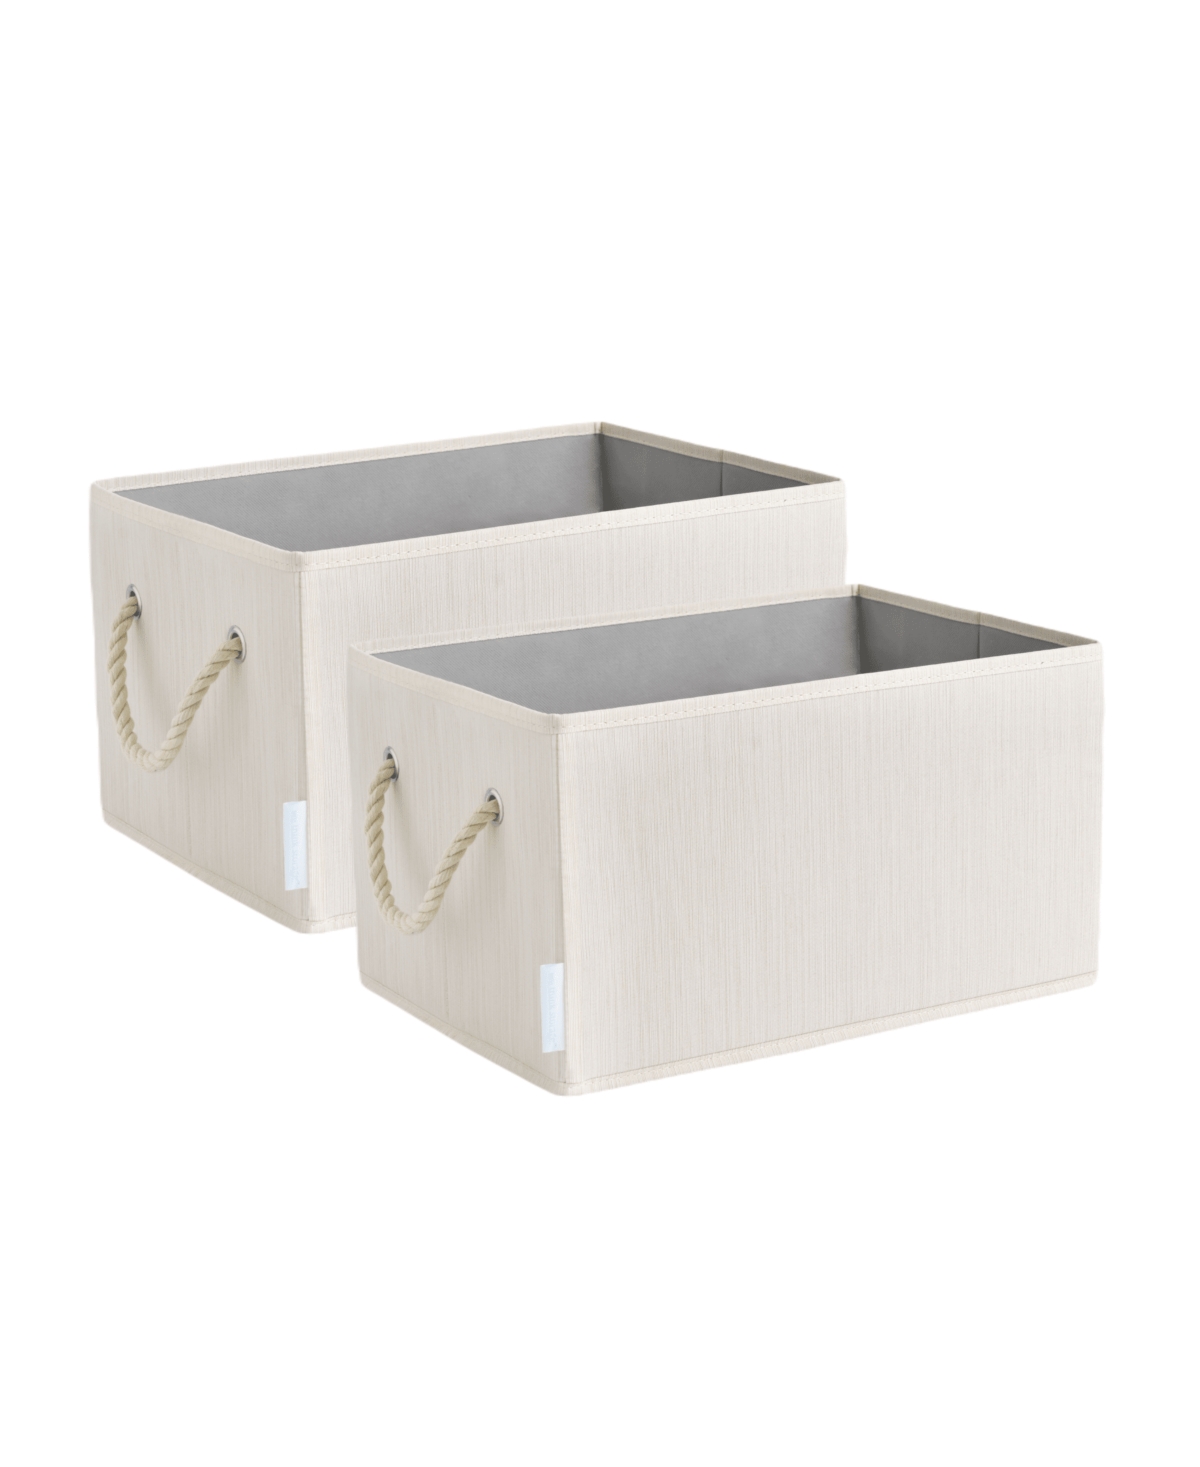 Wethinkstorage 20 Litre Collapsible Fabric Storage Bins With Cotton Rope Handles, Set Of 2 In Ivory